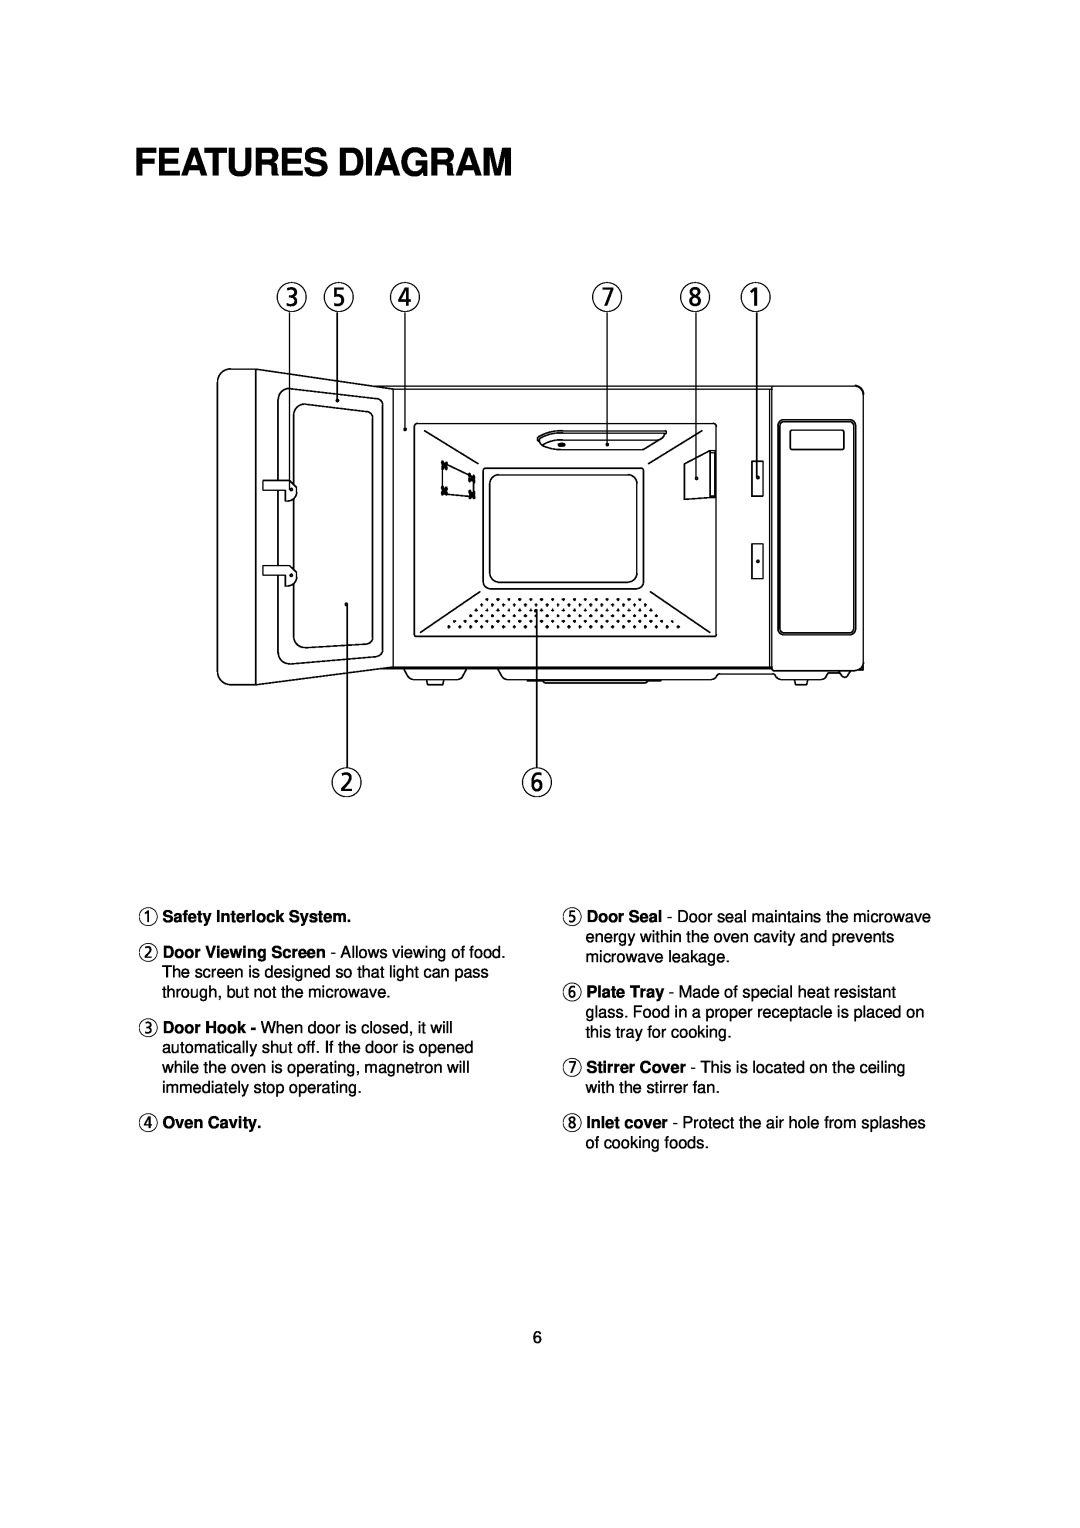 Turbo Air TMW-1100E manual Features Diagram, 1Safety Interlock System, 4Oven Cavity 